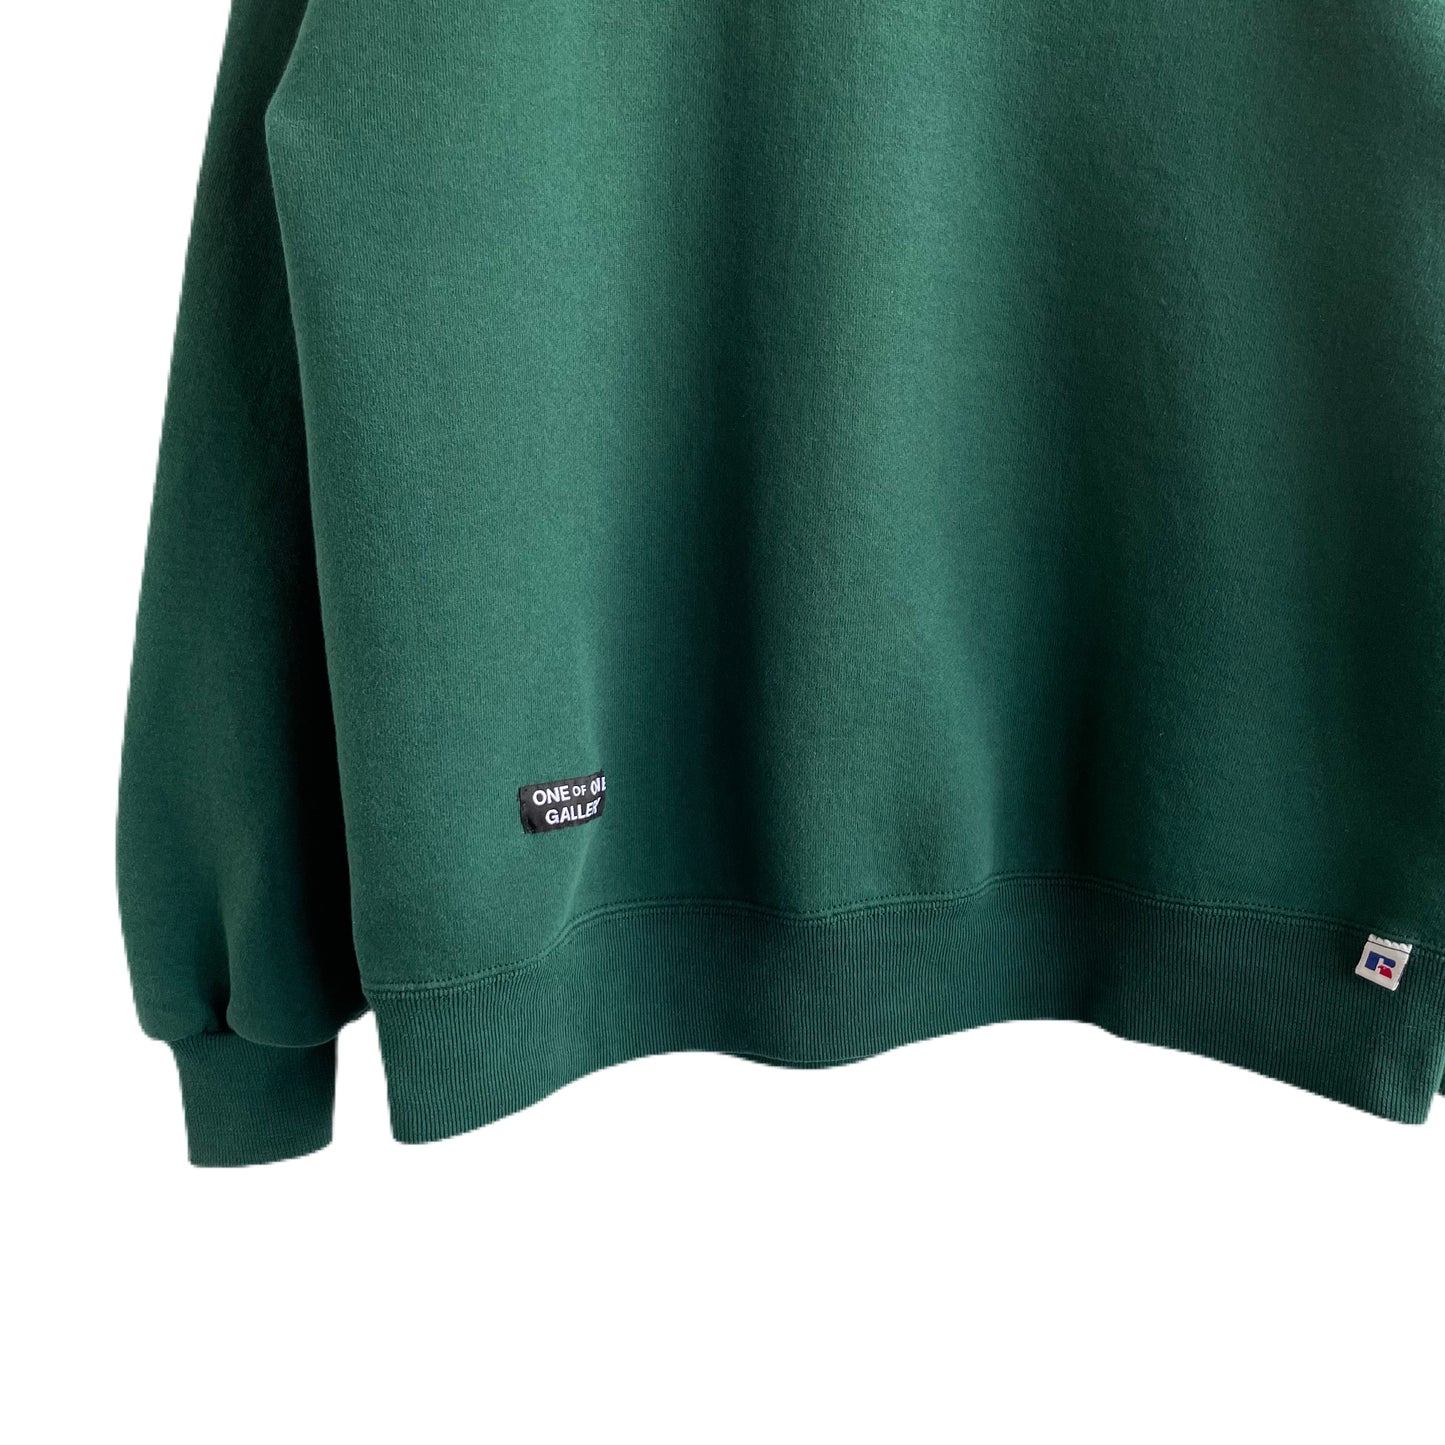 Oneofonegallery VNGT Crewneck